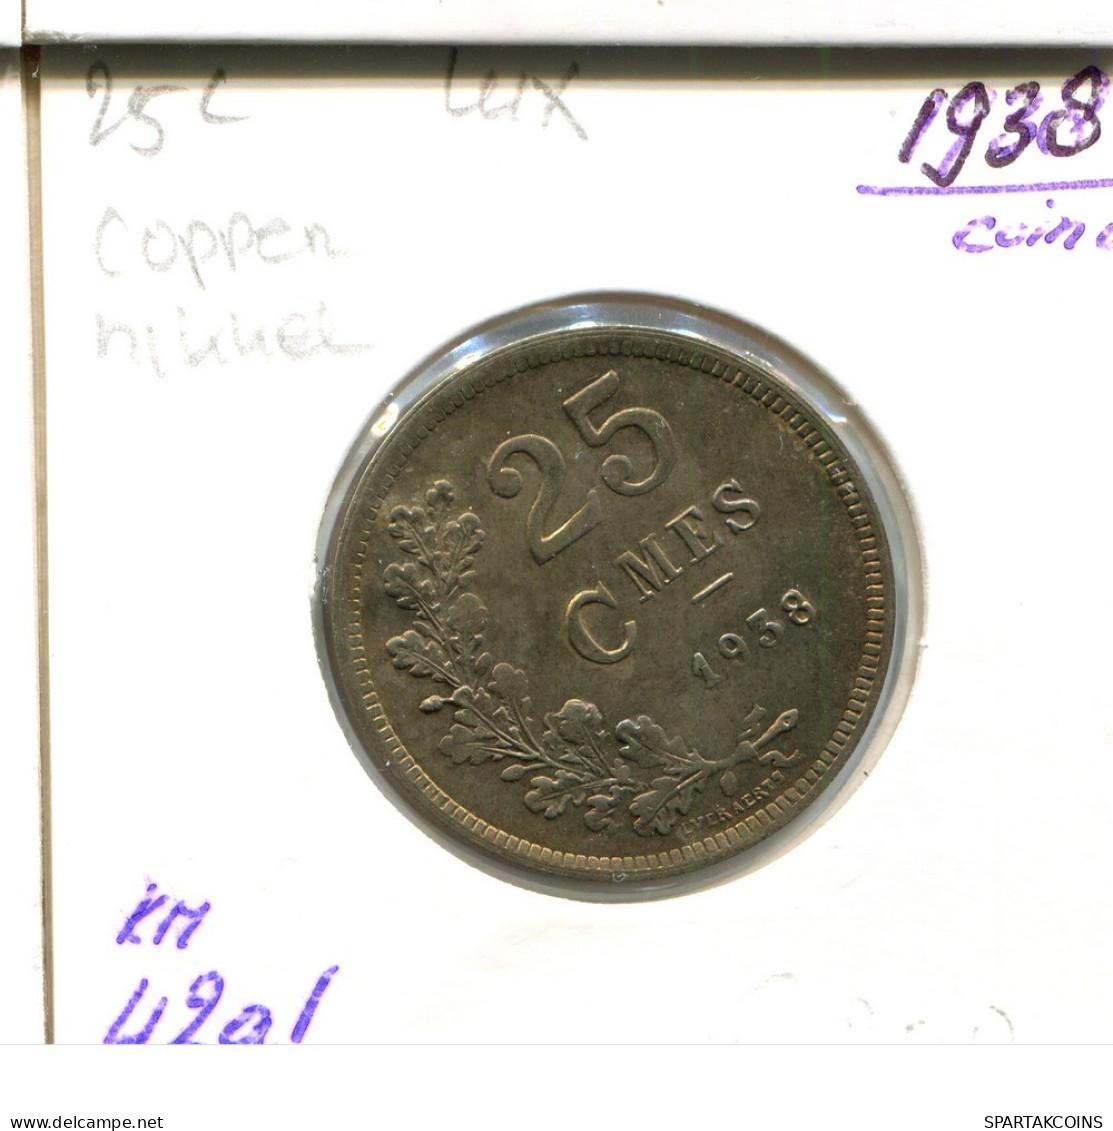 25 CENTIMES 1938 LUXEMBURGO LUXEMBOURG Moneda #AT190.E.A - Luxembourg